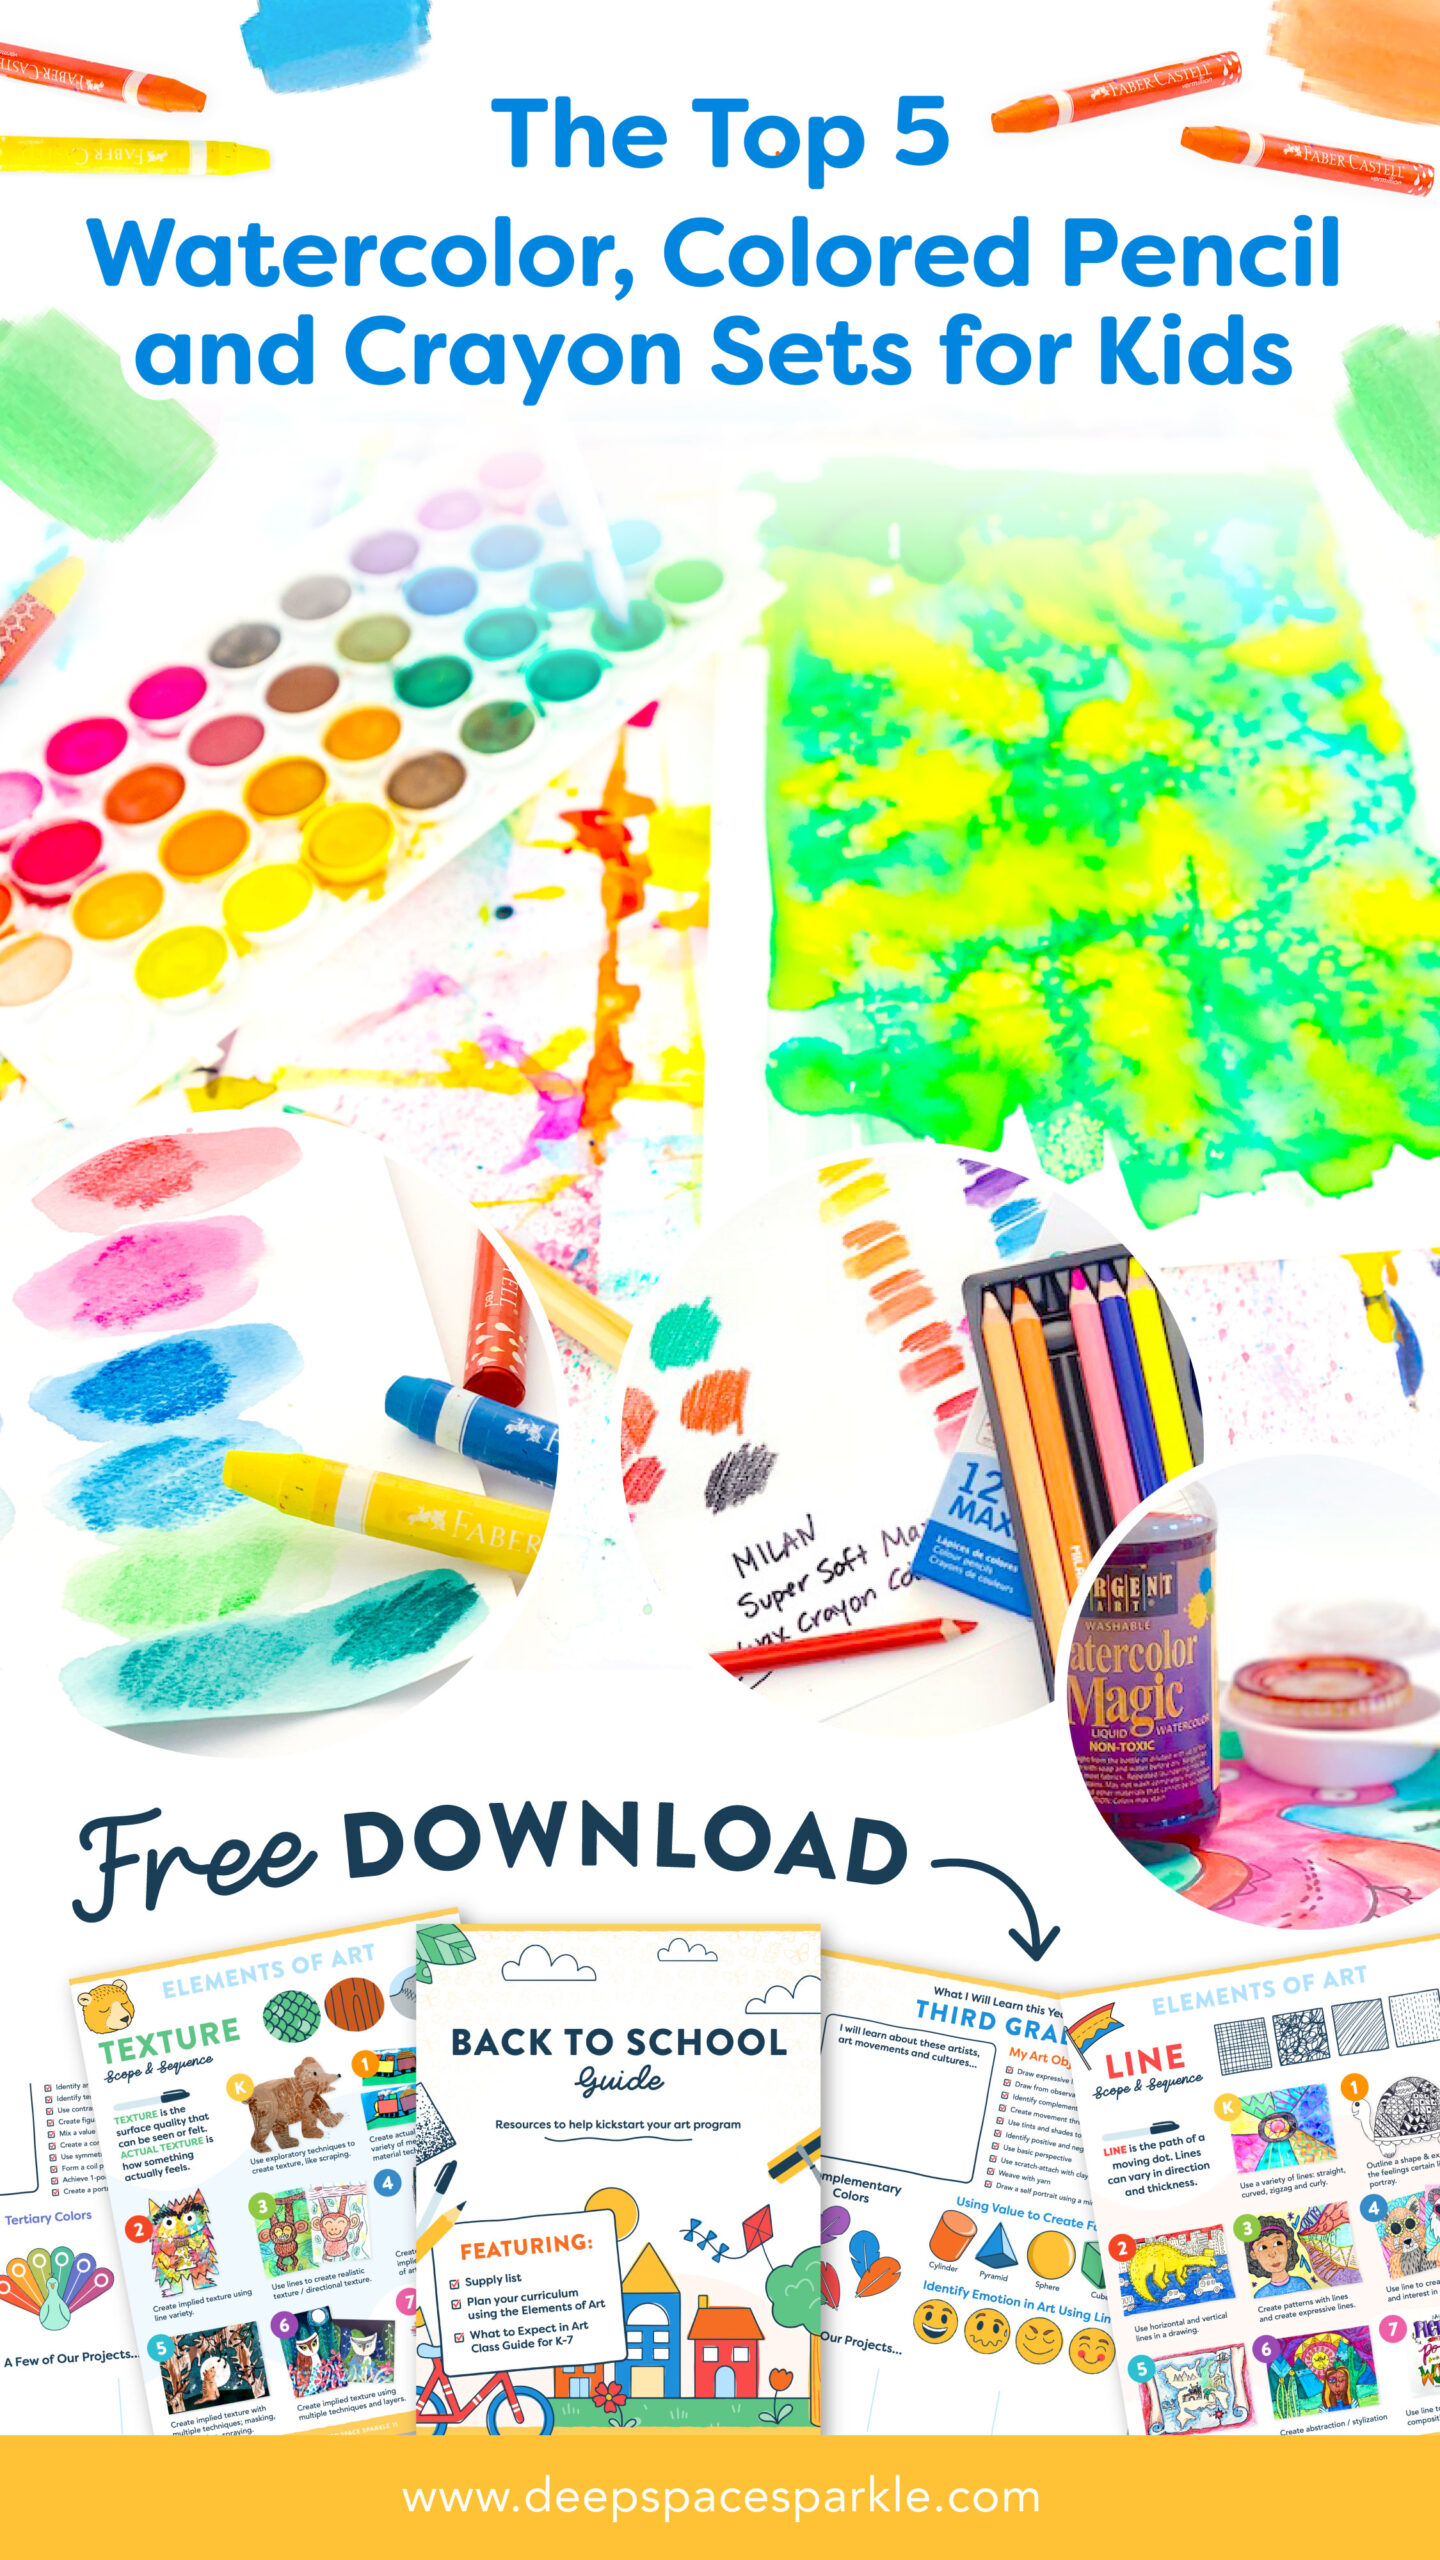 Pin The Top 5 Watercolor, Colored Pencil and Crayon Sets for Kids